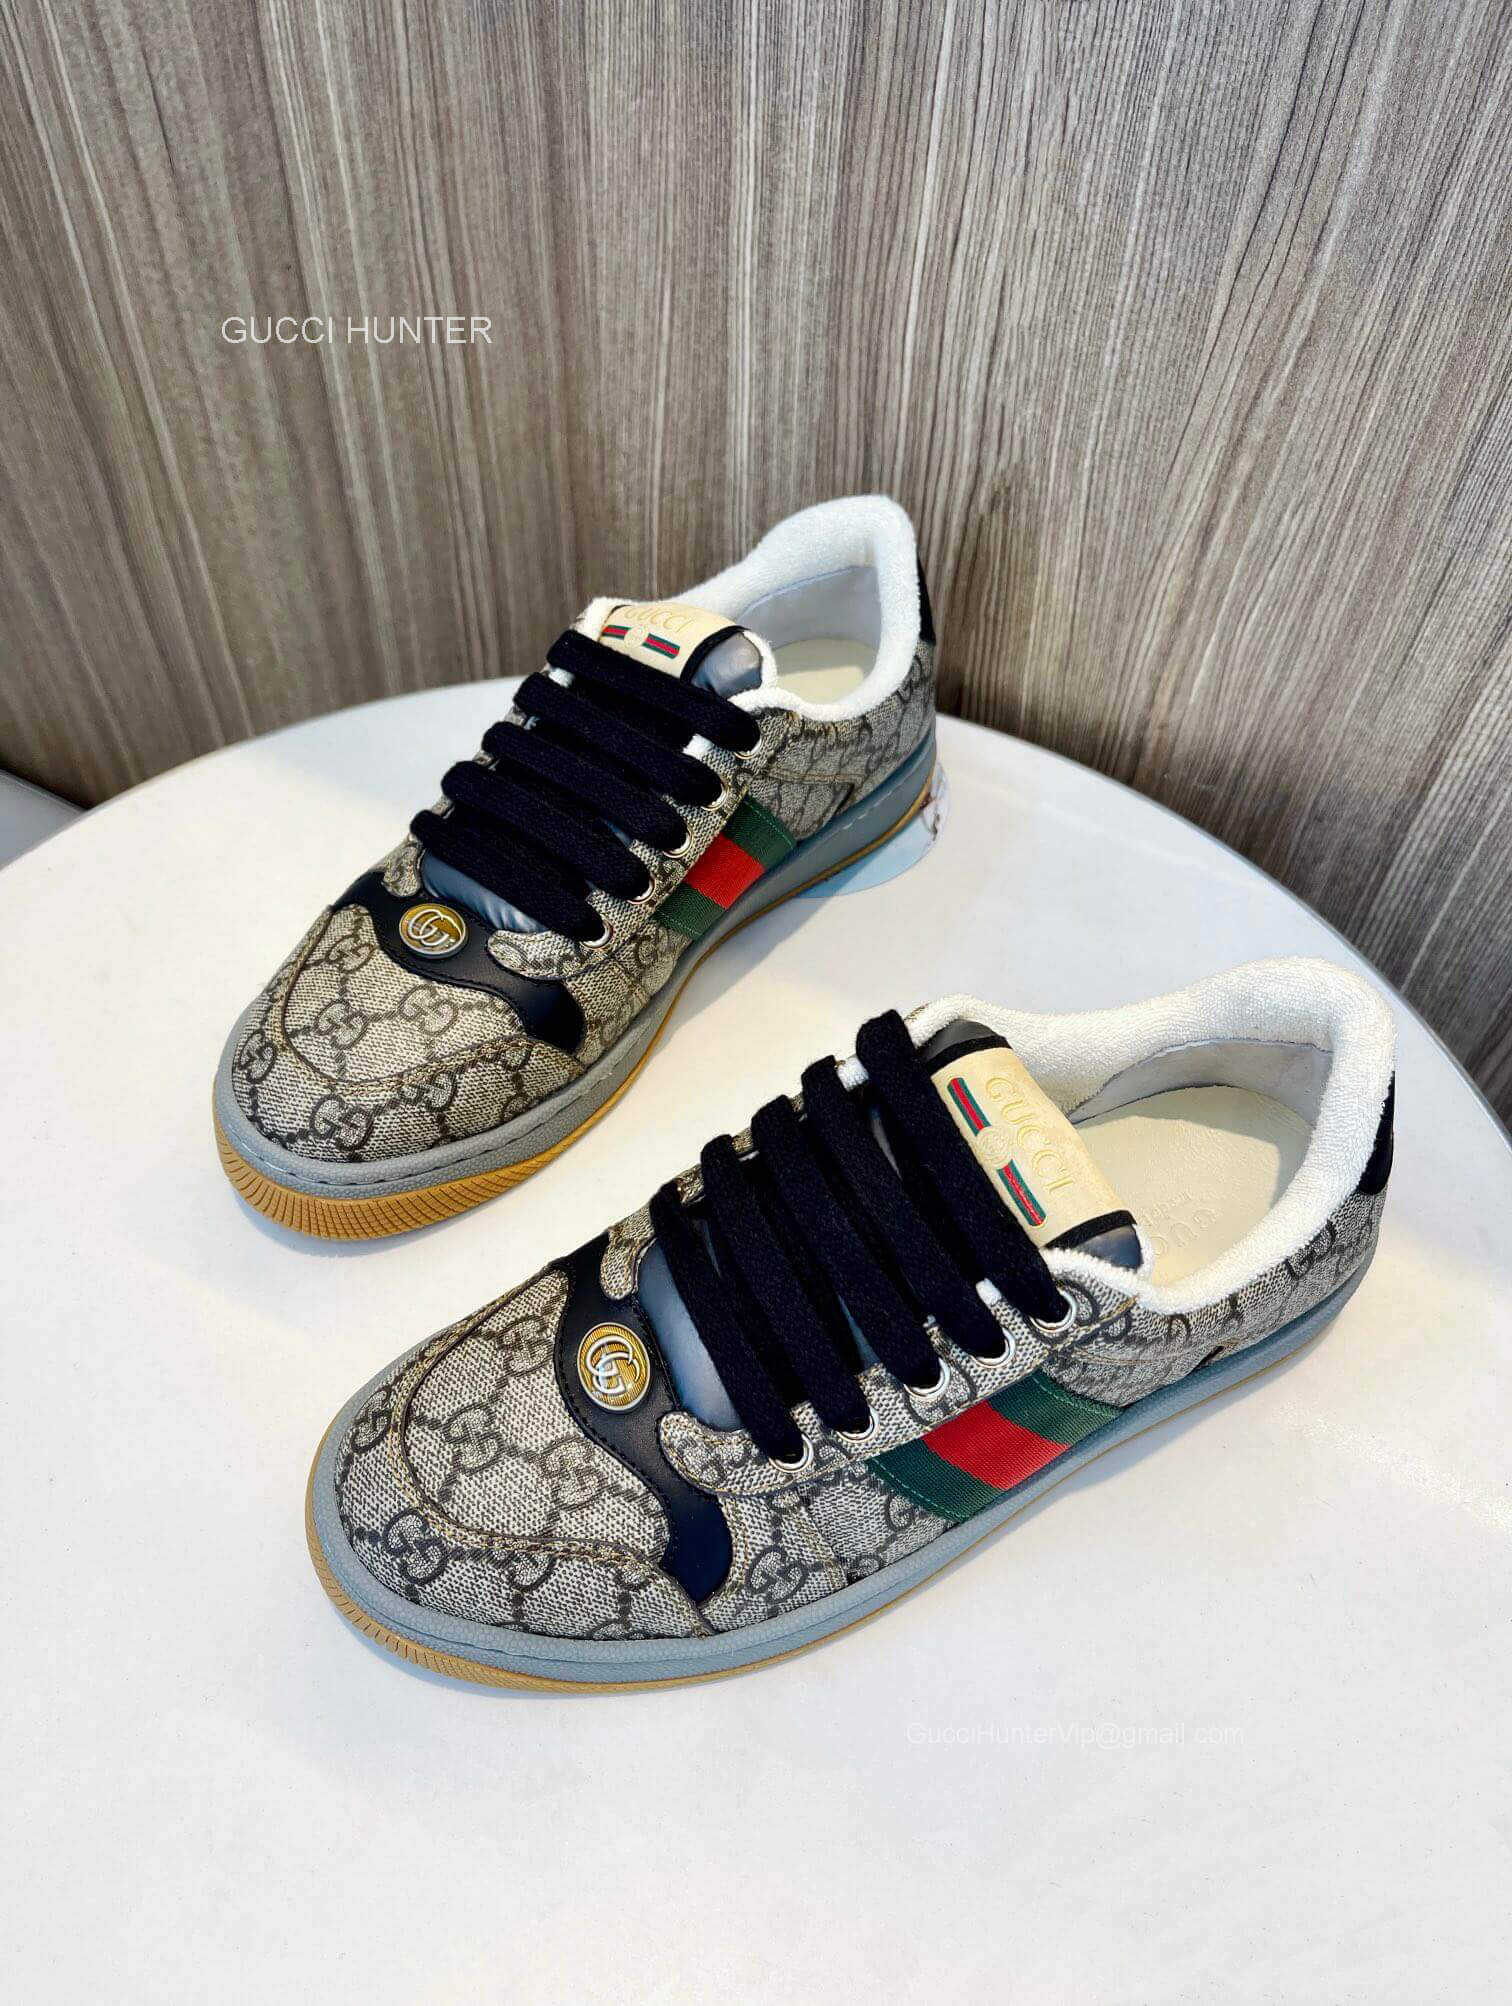 Gucci Low Top Sneaker in GG Supreme Unisex 2281413